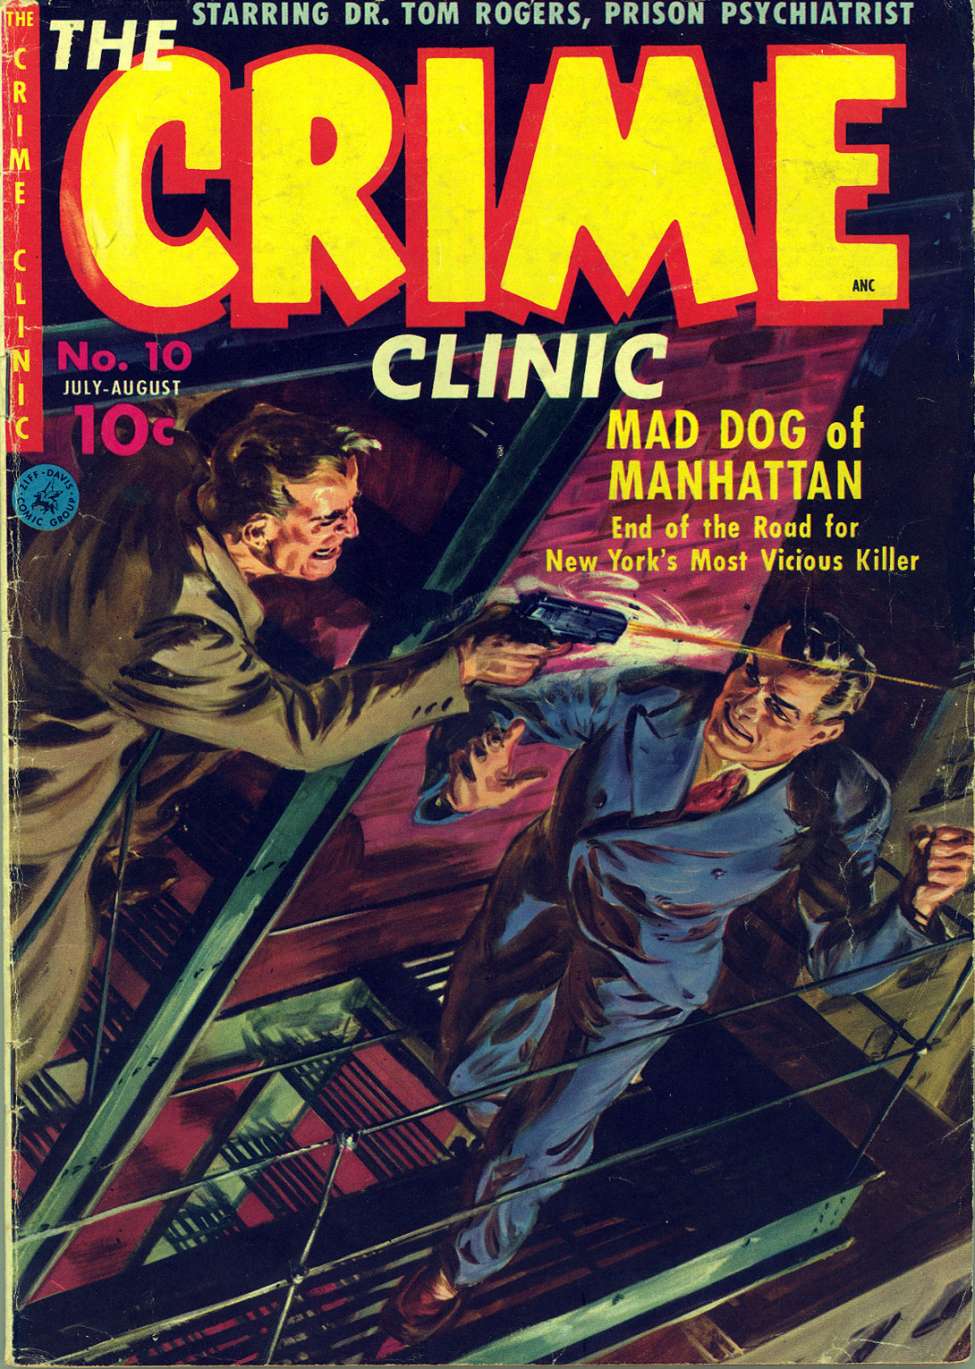 Book Cover For Crime Clinic 1 (10)